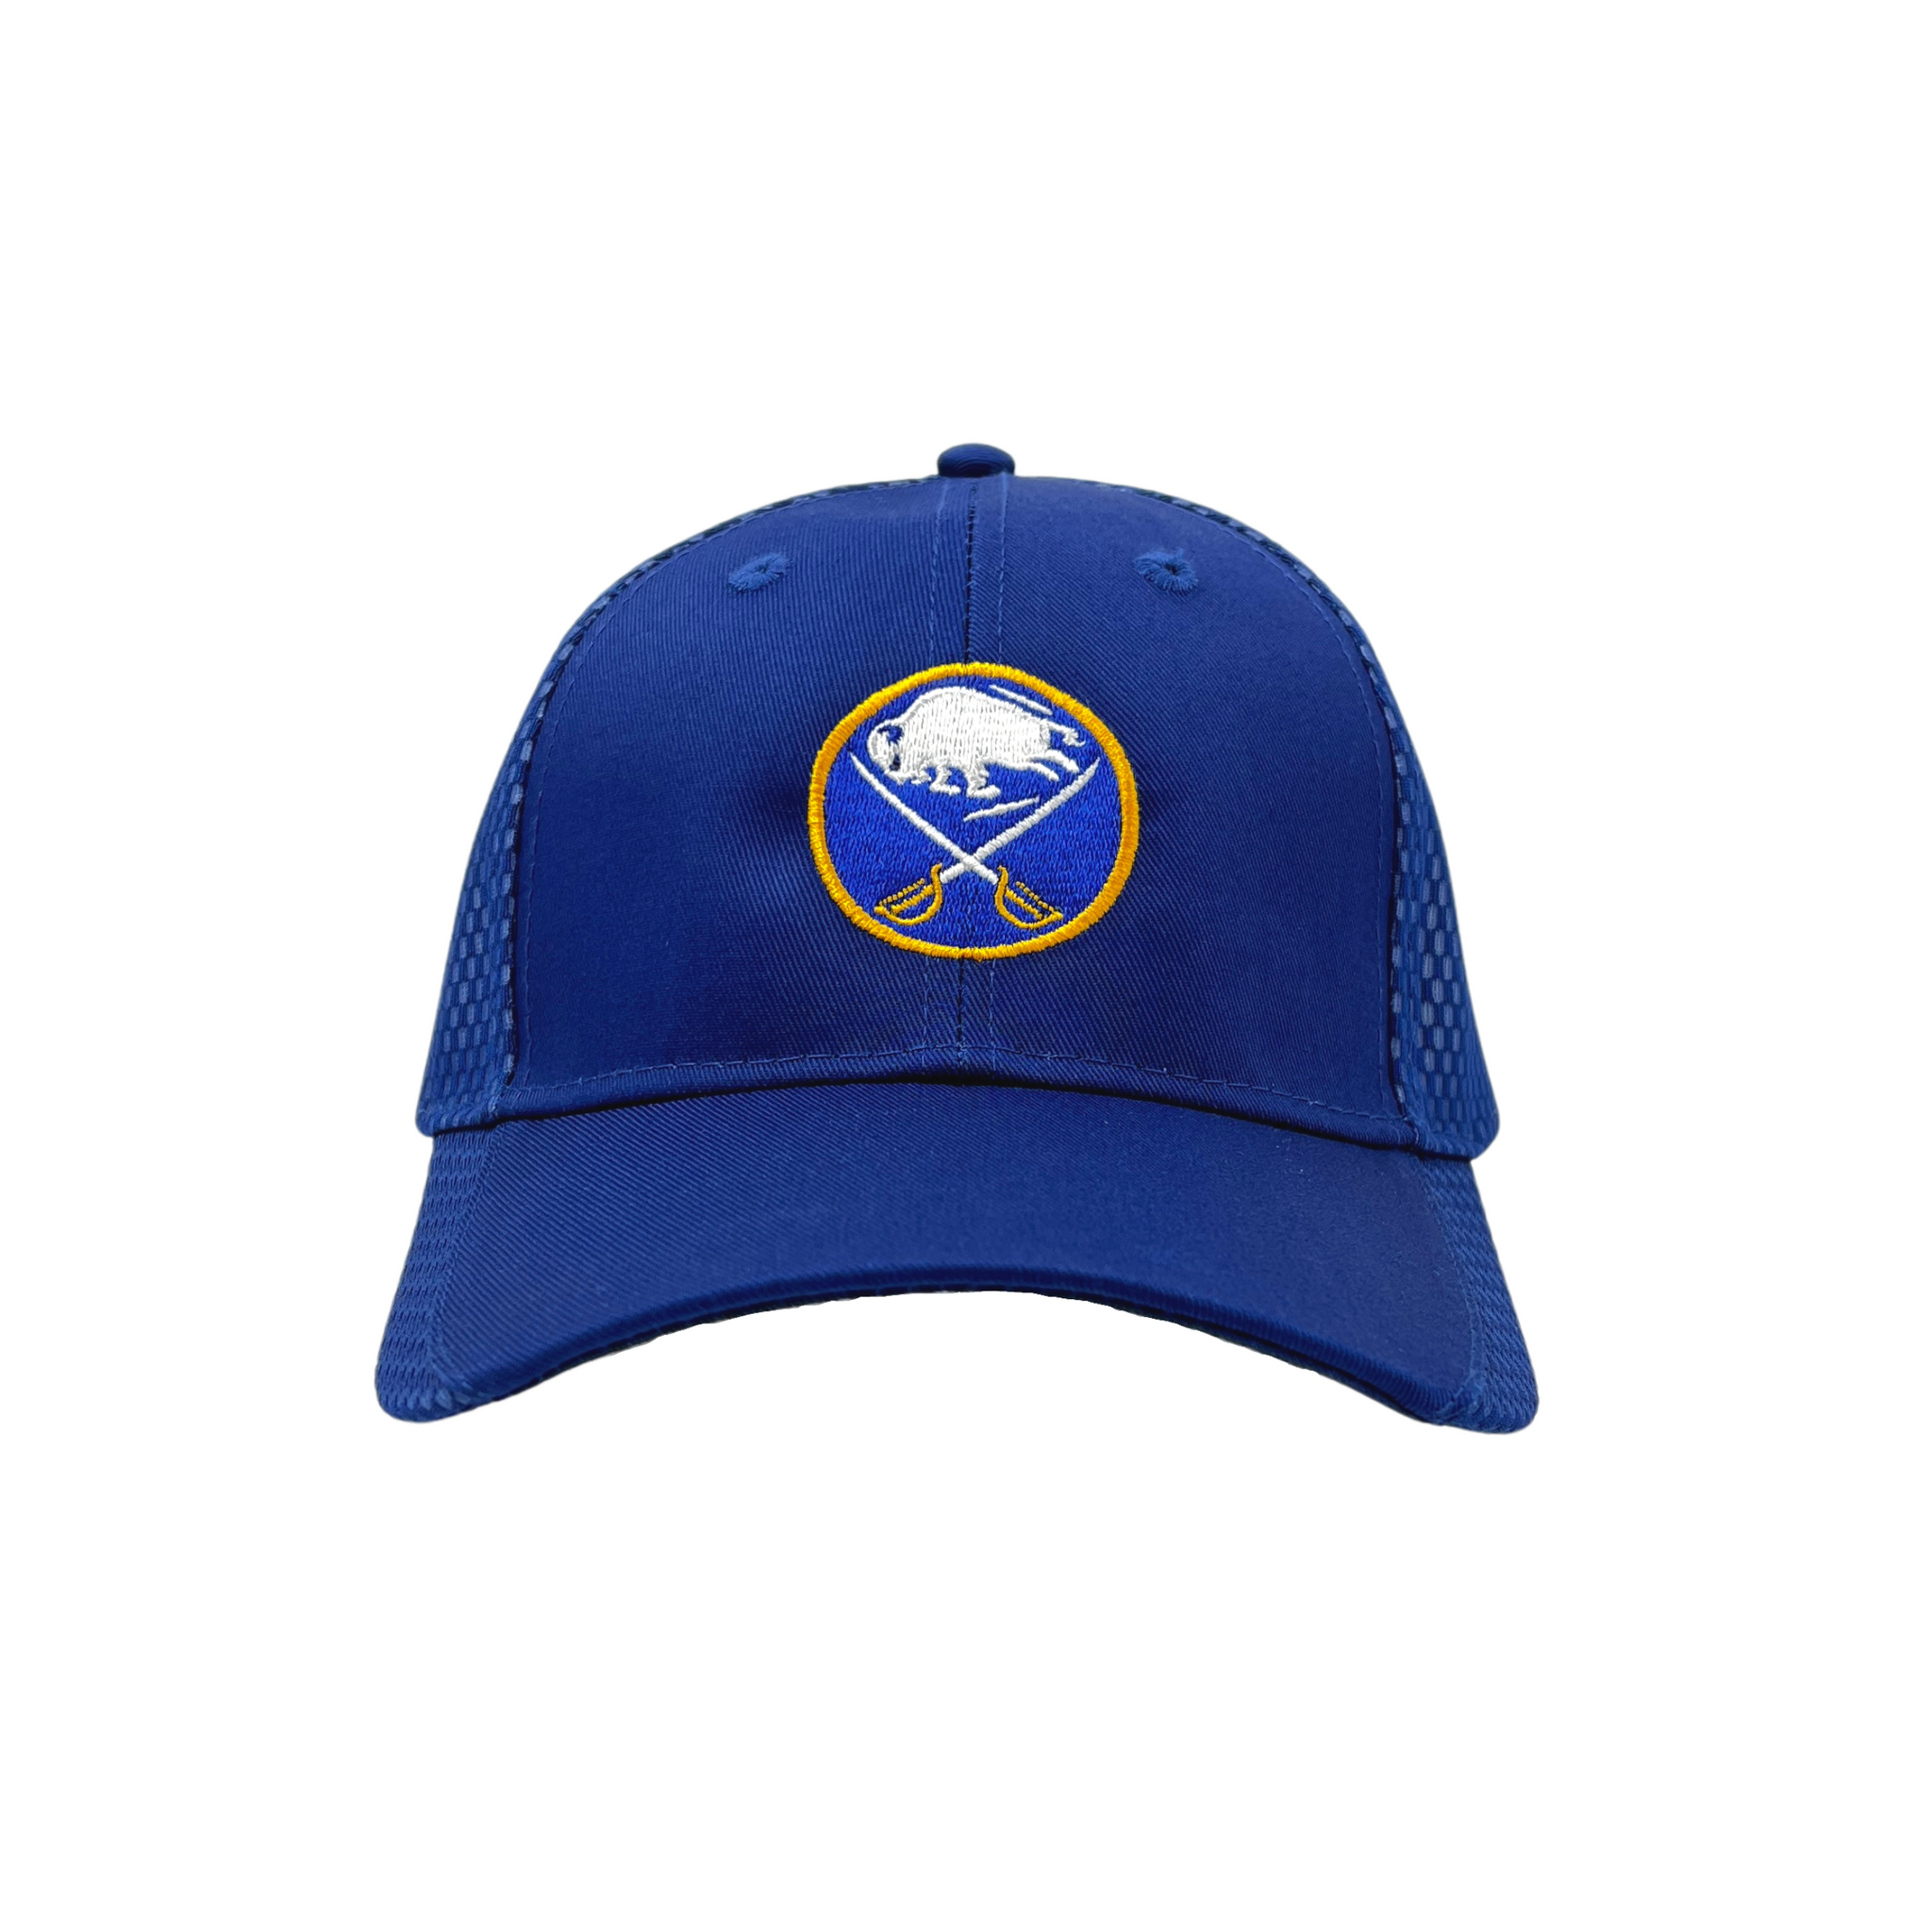 47 Brand Buffalo Sabres BUF Knit Winter Hat – The BFLO Store